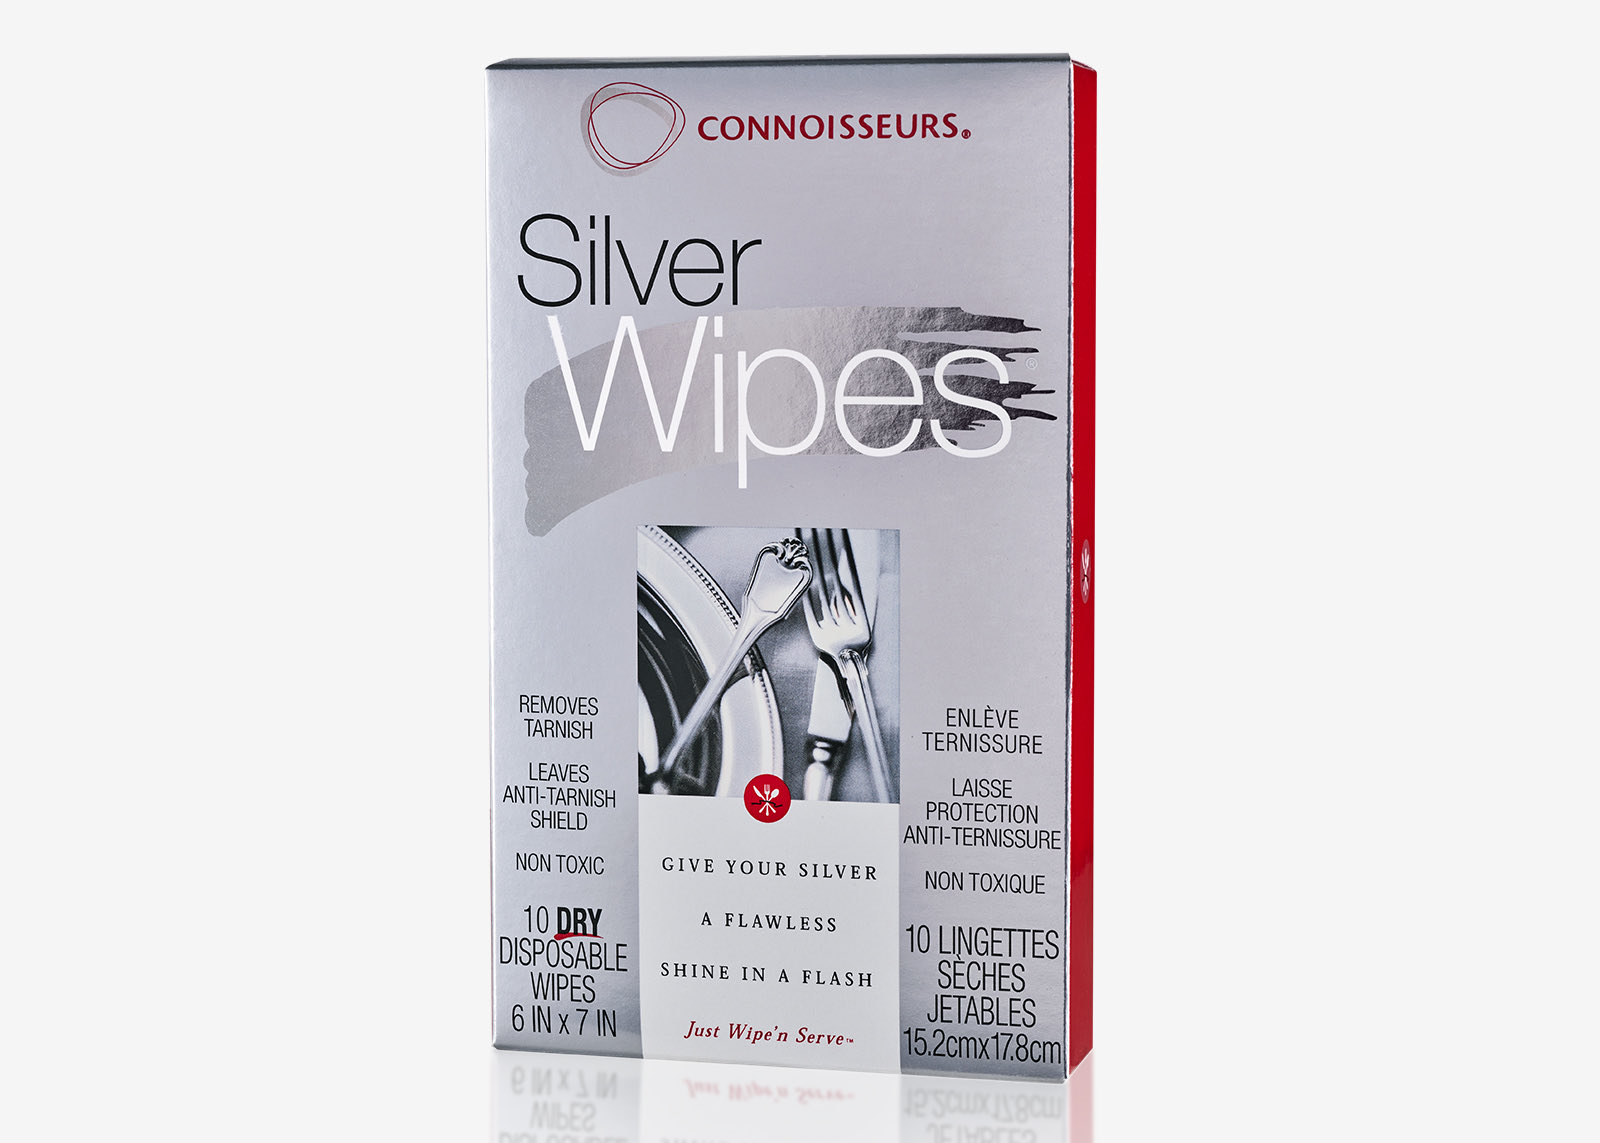 Connoisseurs Jewellery Wipes 25 Wipes Cleaning Jewelry Gold And Silver